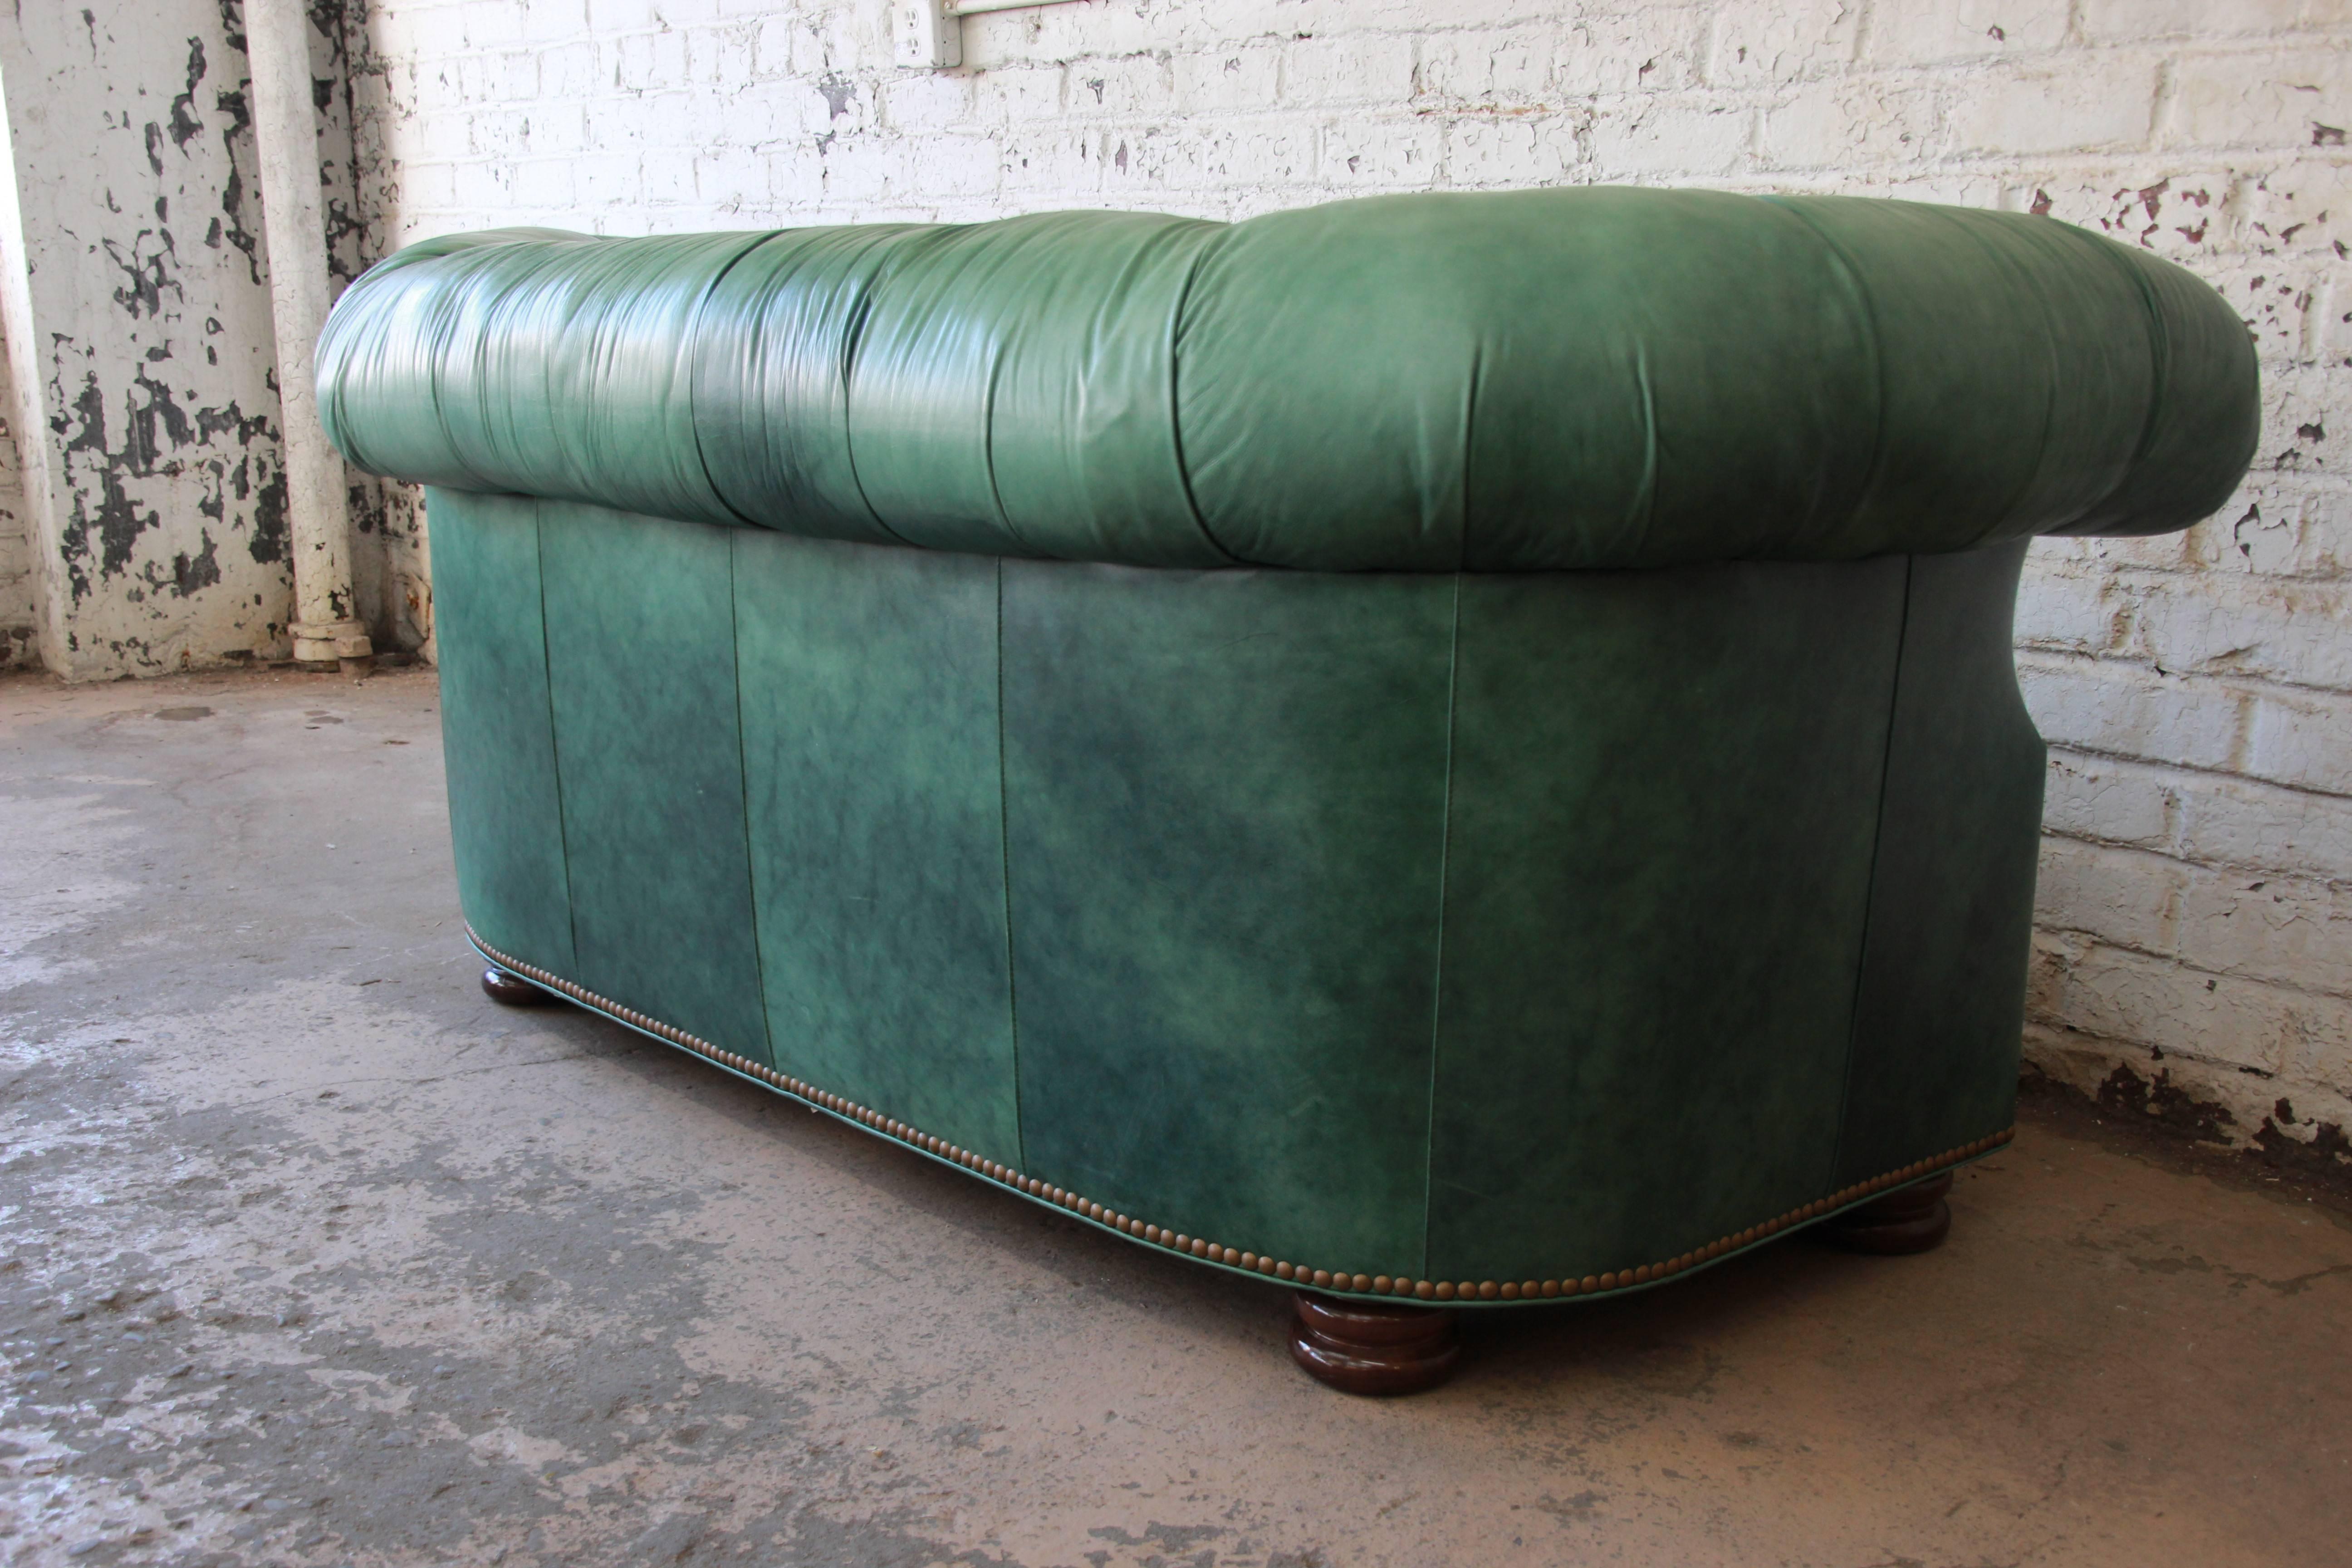 20th Century Vintage Teal Tufted Leather Chesterfield Sofa by Hancock & Moore